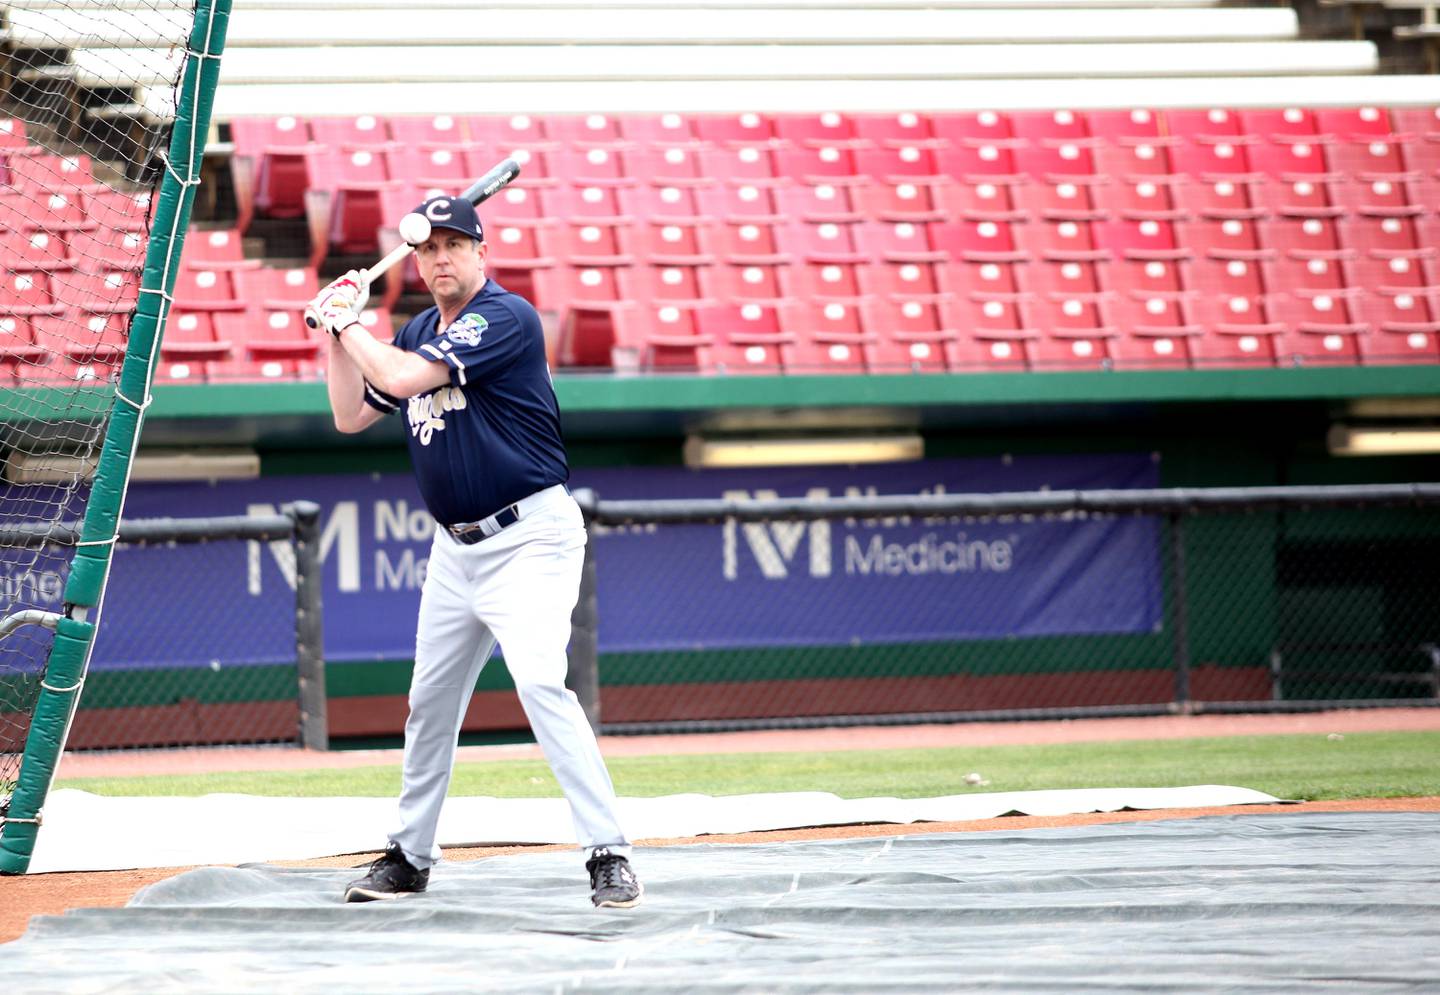 Kane County Cougars Manager George Tsamis runs batting practice with his team at Northwestern Medicine Field in Geneva in preparation for the 2021 Kane County Cougars baseball season.